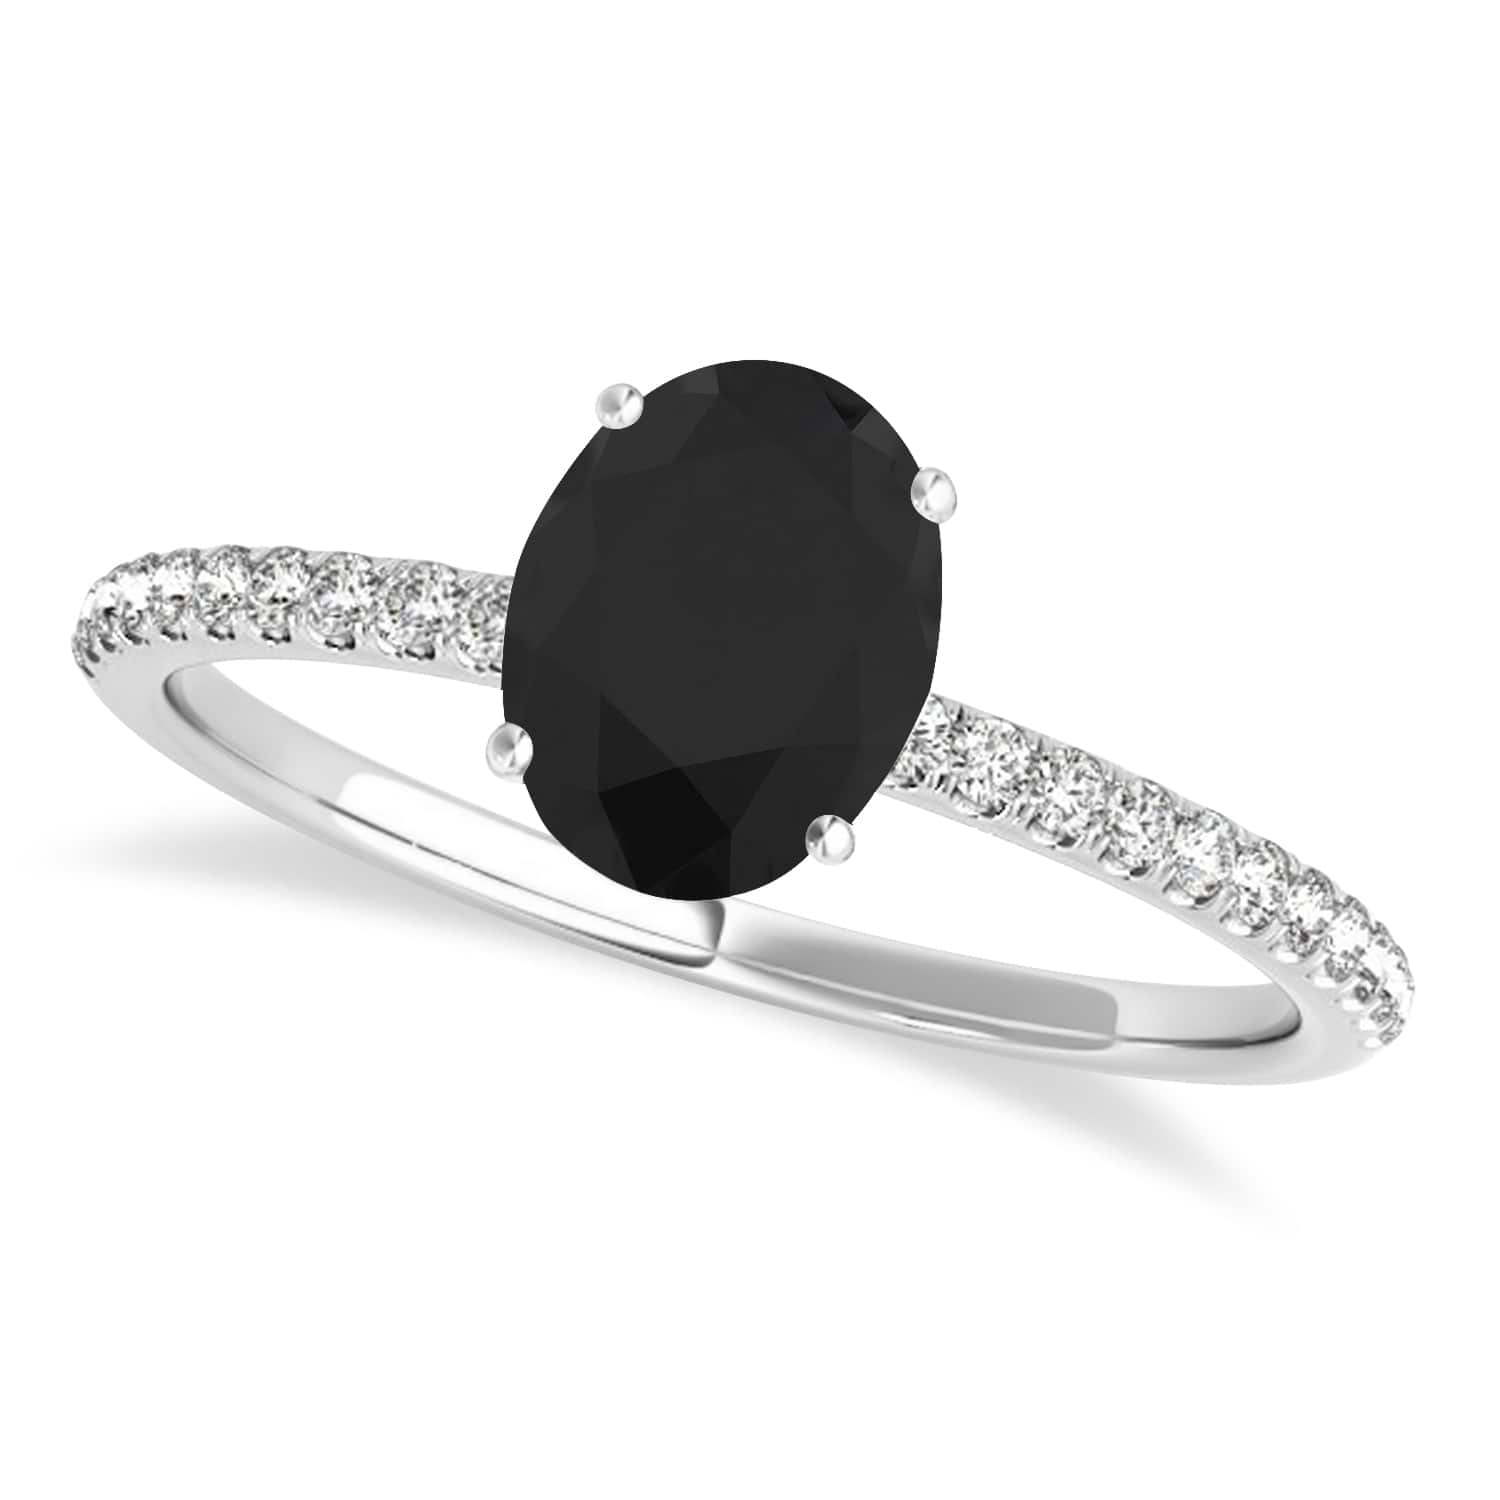 Black & White Diamond Accented Oval Shape Engagement Ring 14k White Gold (1.50ct)